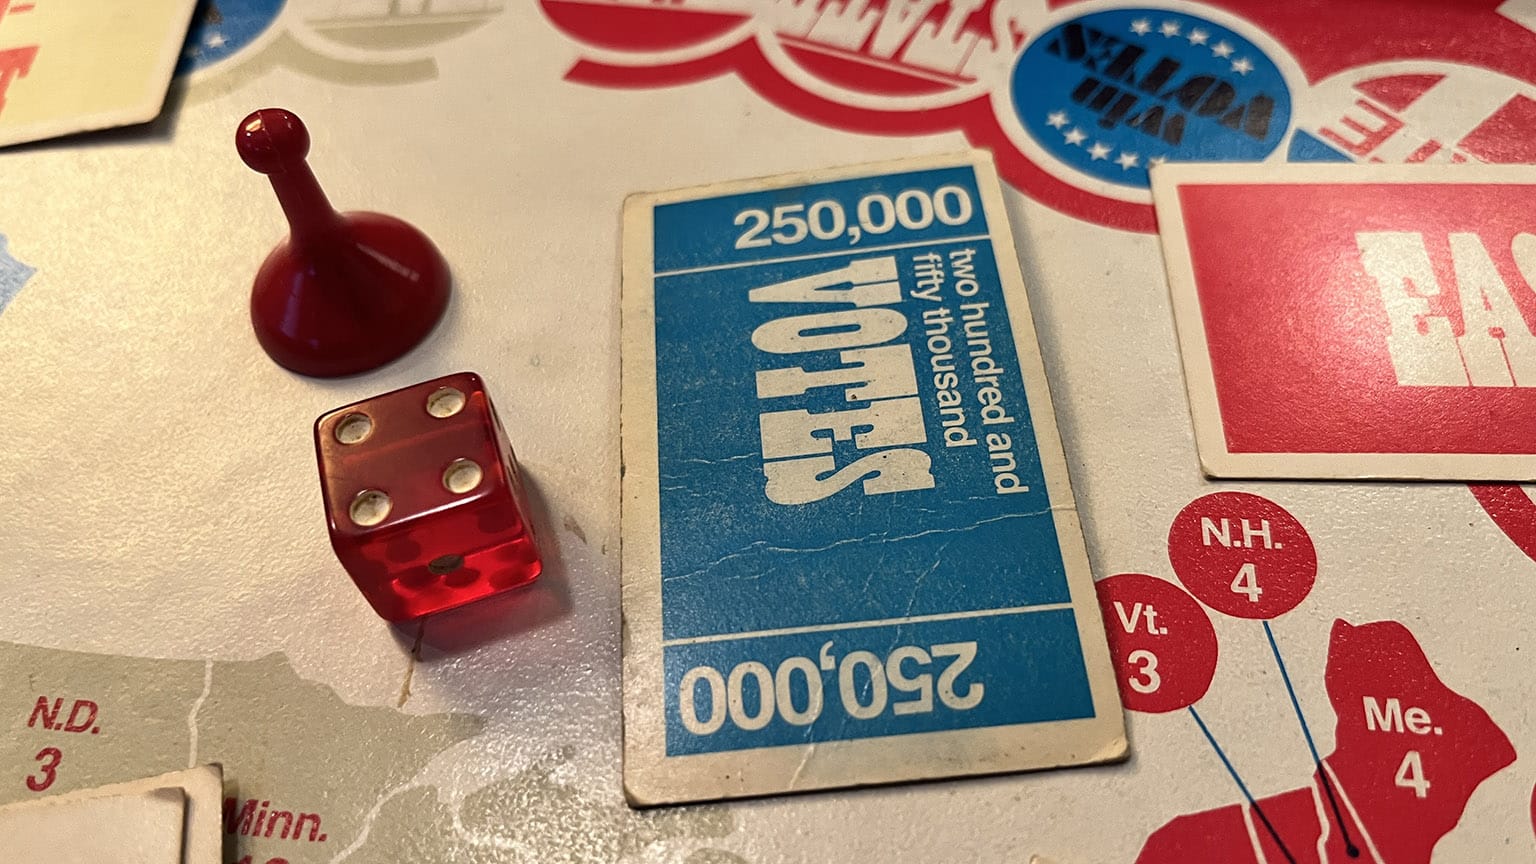 'LANDSLIDE' (1971) board, game pieces, and playing cards in colorful red white and blue